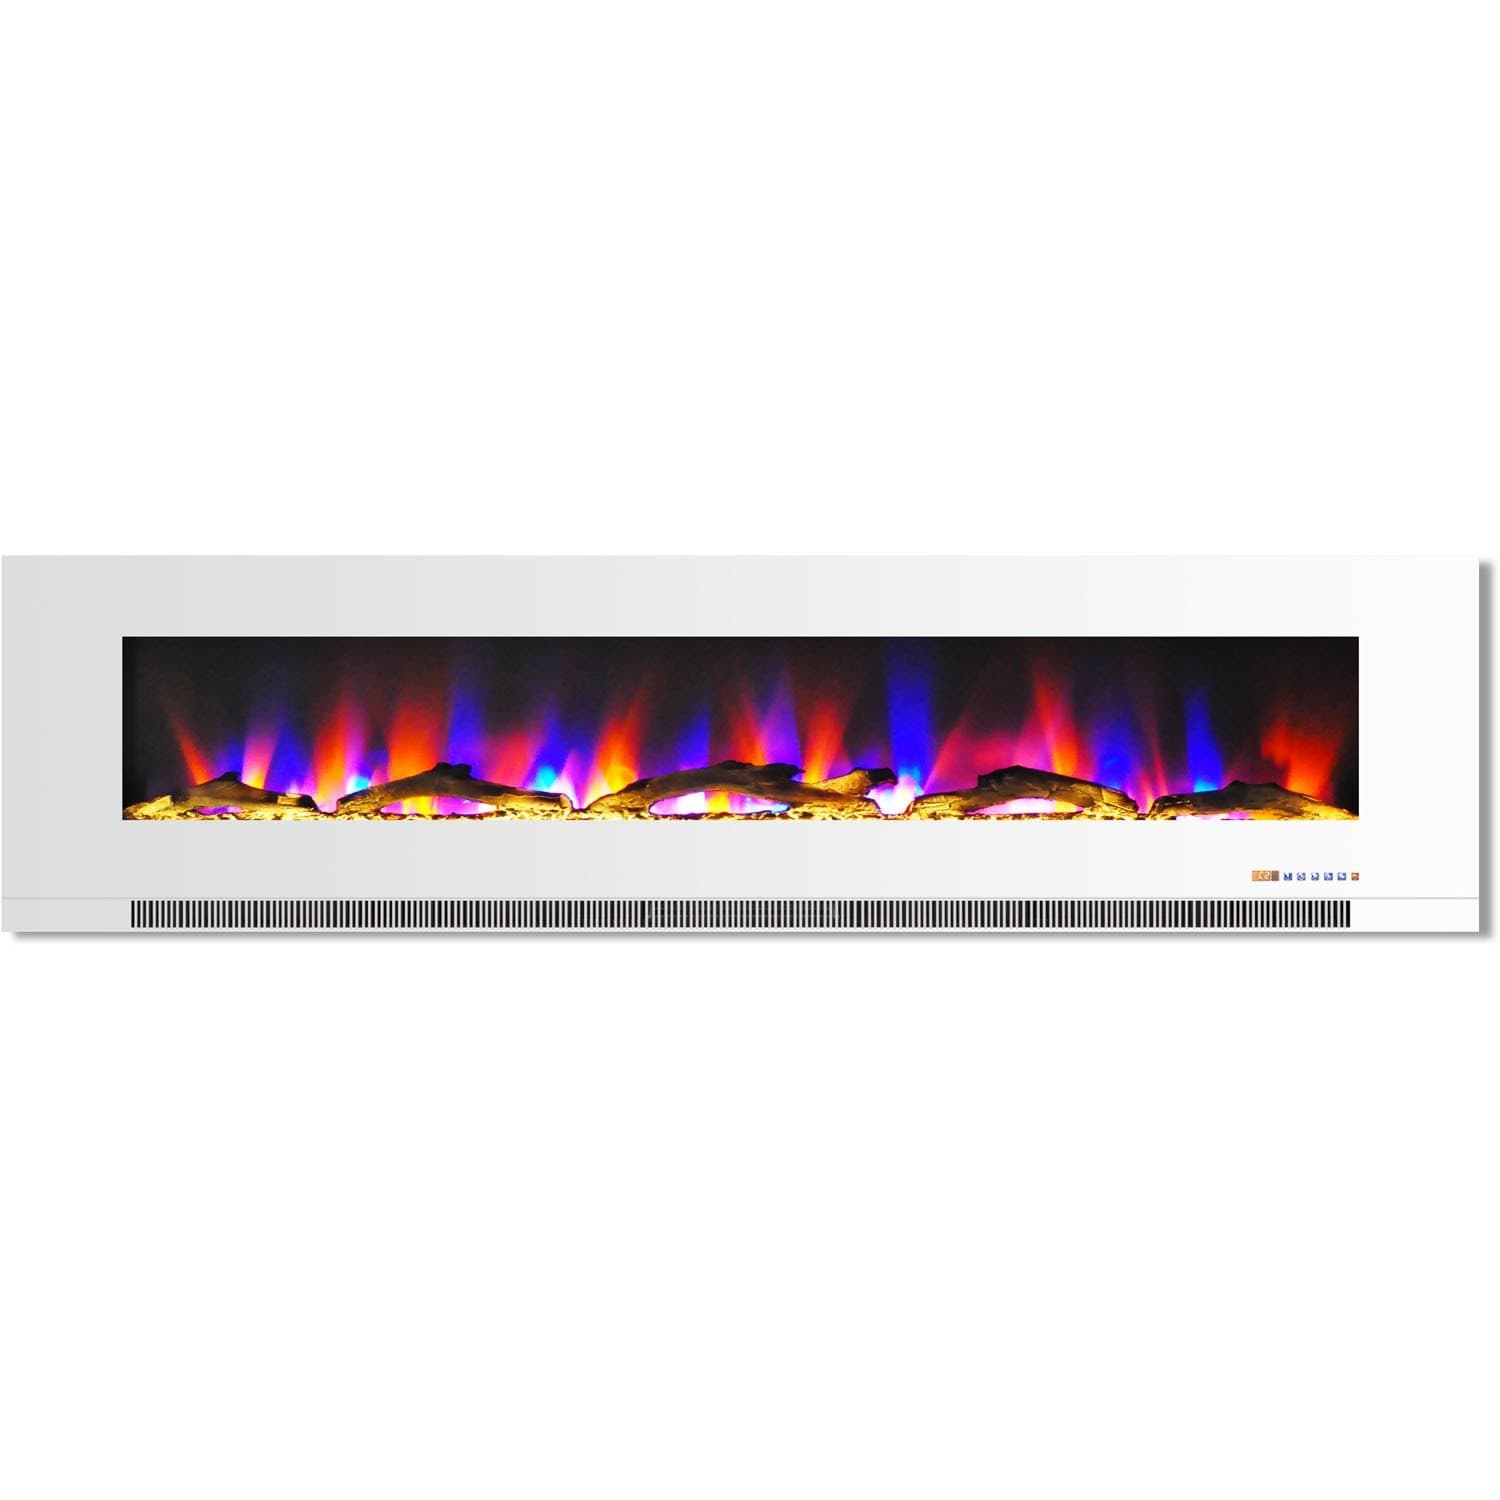 Cambridge Electric Wall-hung Fireplaces Cambridge 78 In. Wall-Mount Electric Fireplace in White with Multi-Color Flames and Driftwood Log Display